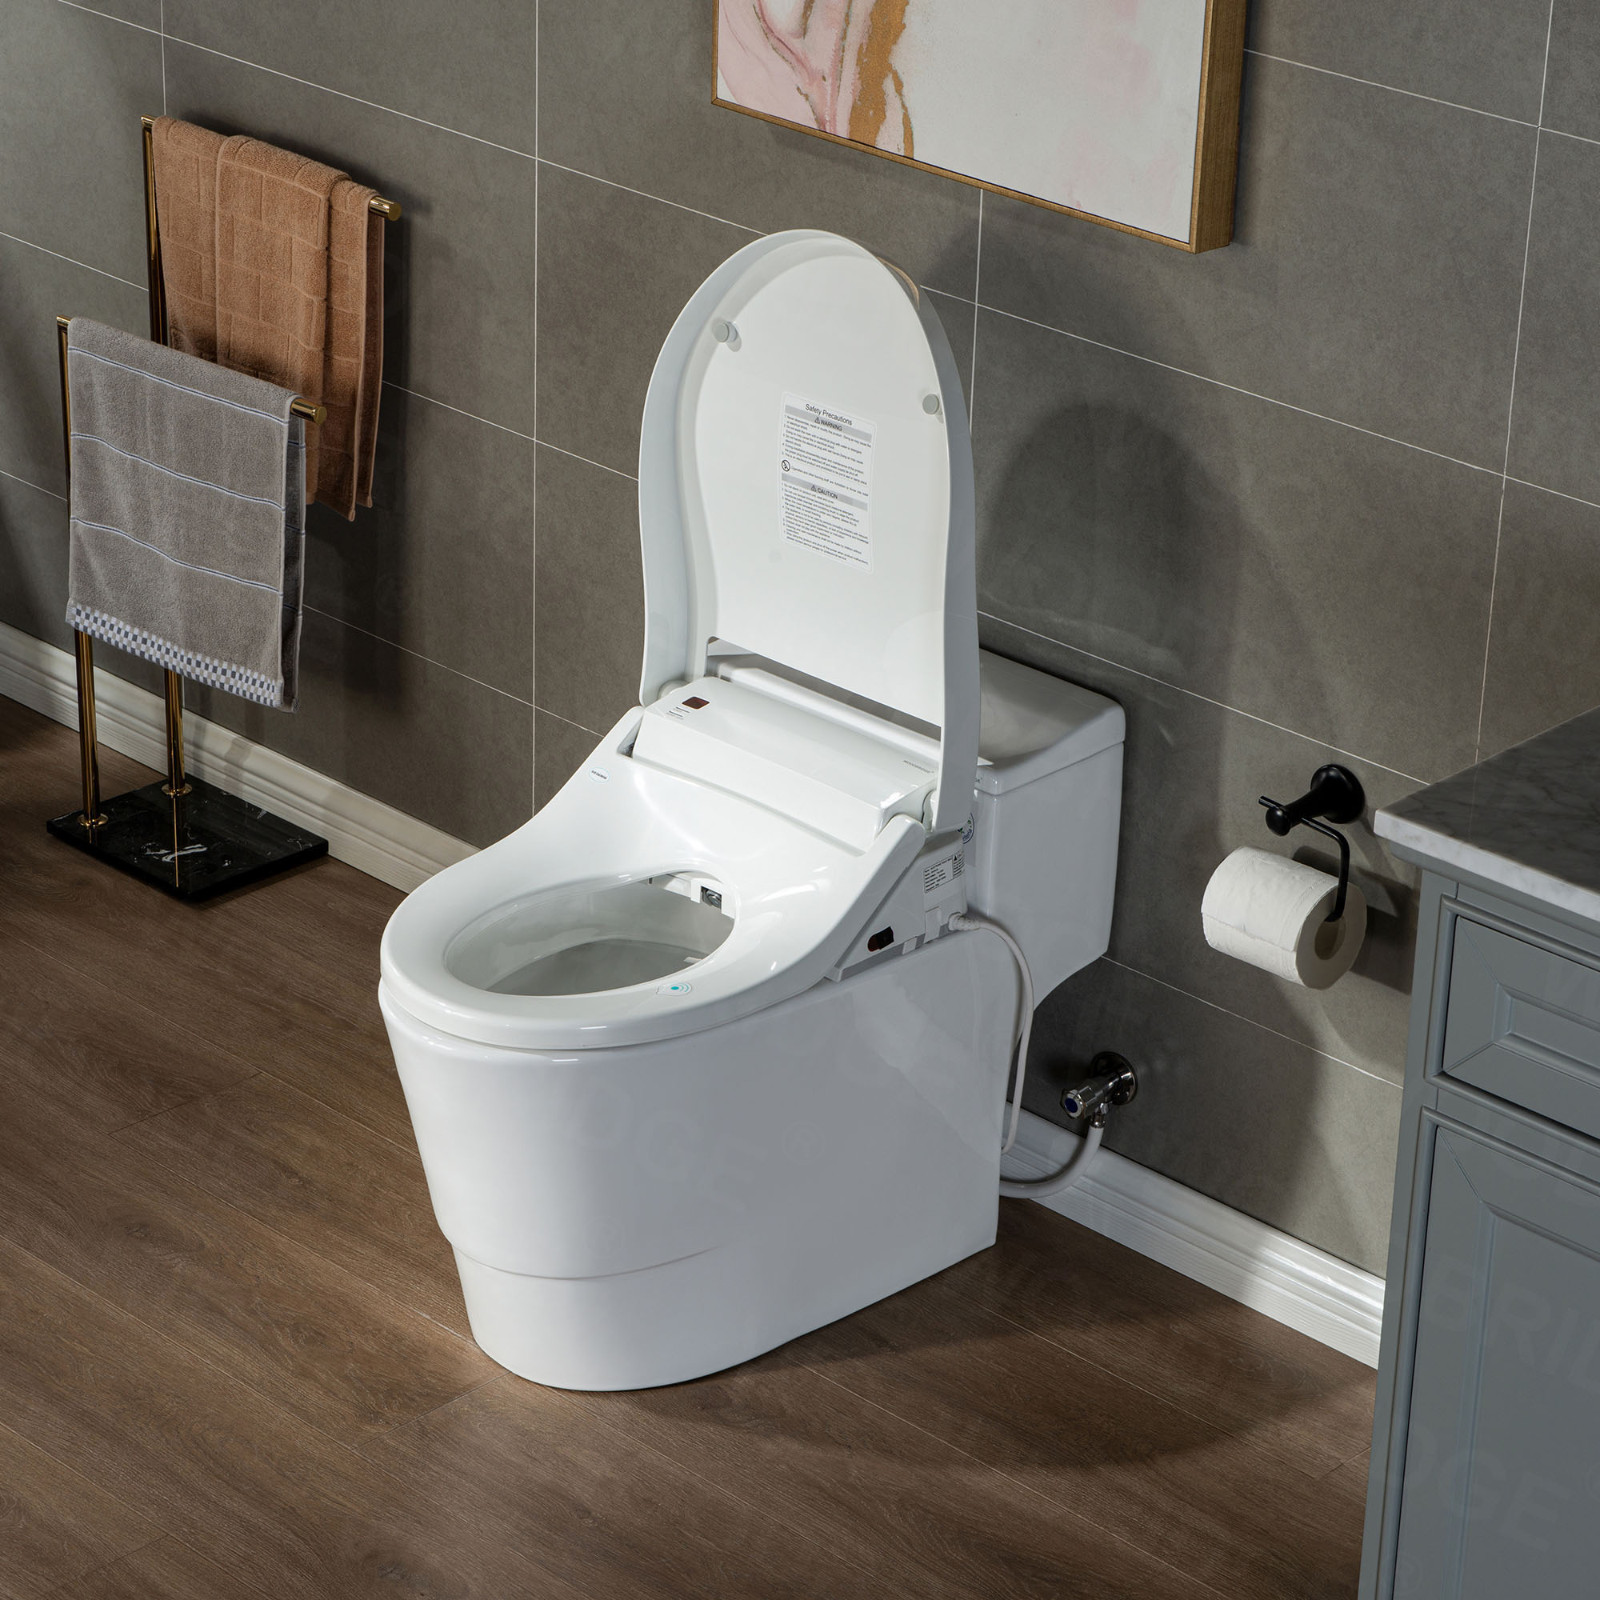  WOODBRIDGE Toilet & Bidet Luxury Elongated One Piece Advanced Smart Seat with Temperature Controlled Wash Functions and Air Dryer, Toilet with Bidet. T-0737, Bidet & Toilet_9727